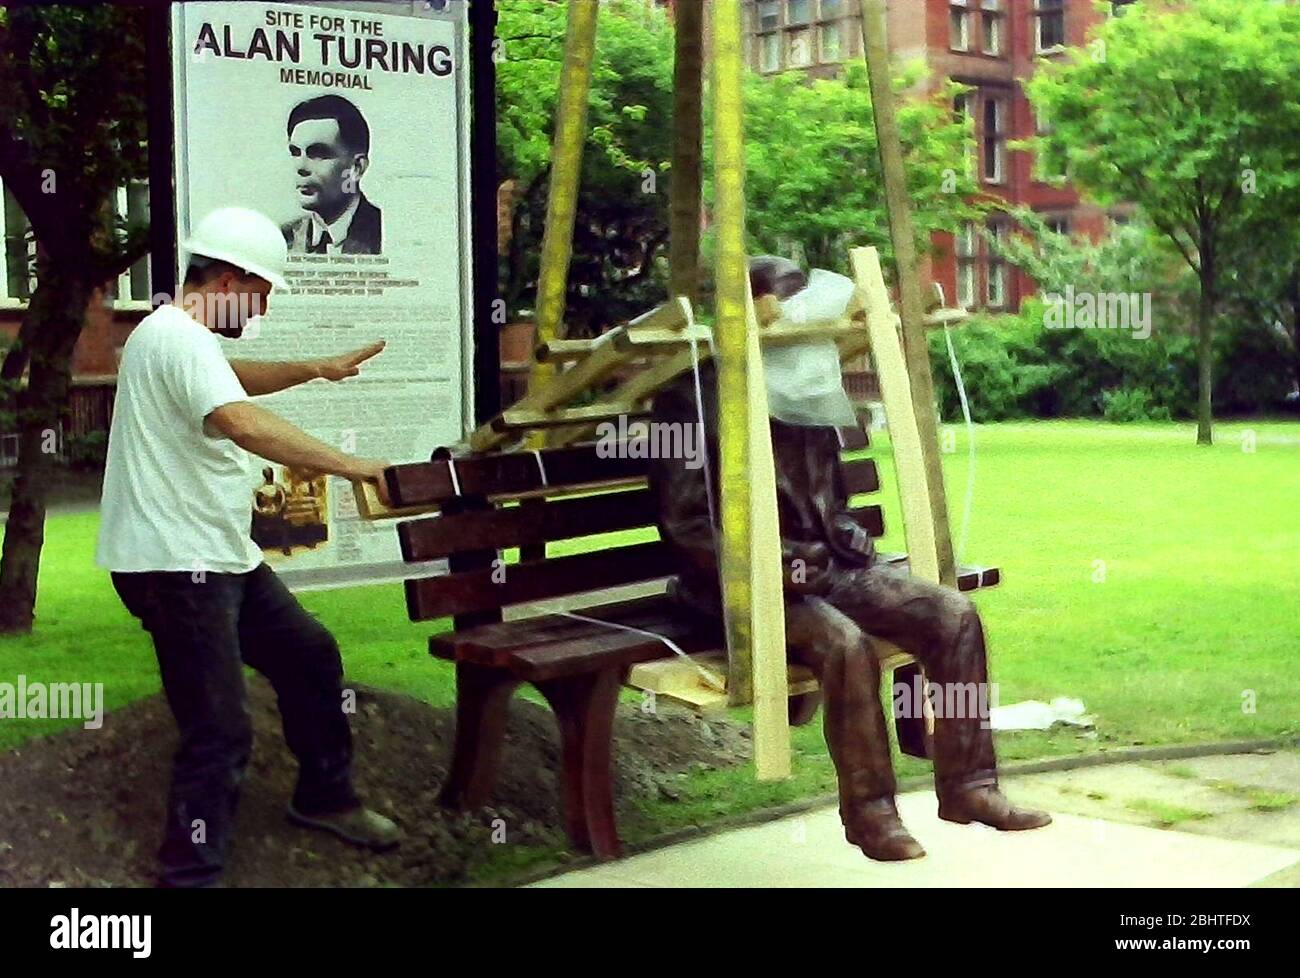 Installing the Alan Turing statue and memorial, Sackville Gardens, Manchester, uk, in 2001. The statue was later officially unveiled on 23 June, 2001, Turing's birthday. Glyn Hughes, industrial sculptor and designer of the statue, oversees the operation. Alan Mathison Turing OBE was an English mathematician, computer scientist, logician, and cryptanalyst. In WW2 he led a team that was responsible for breaking German ciphers of the Enigma machine. Turing was then influential in developing computer science at the University of Manchester. Stock Photo